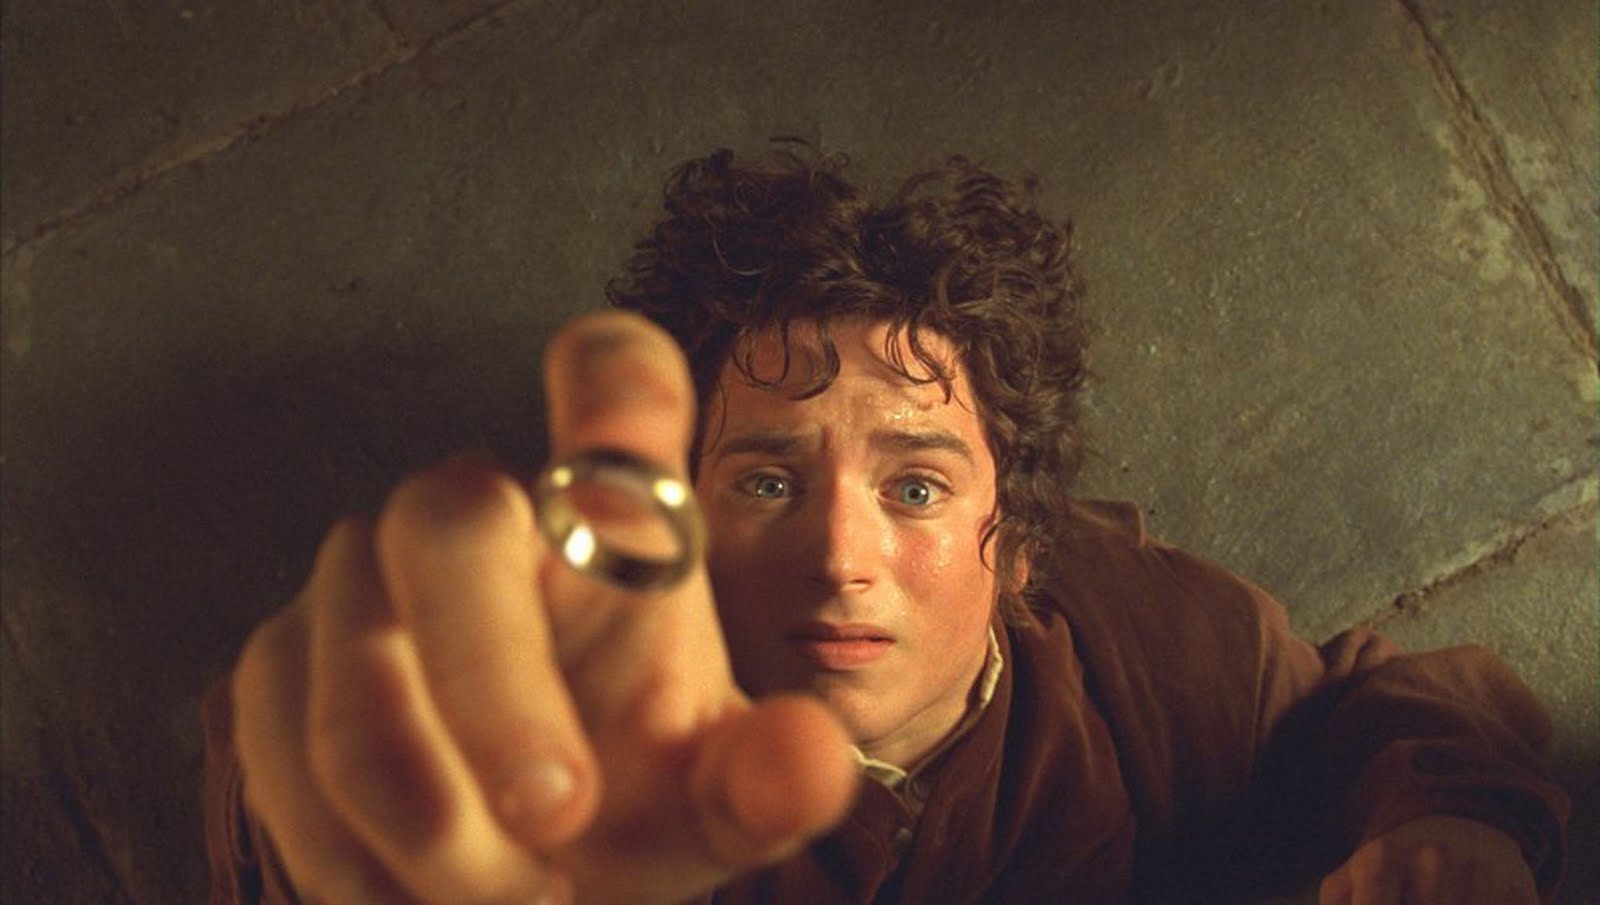 An analysis of lord of the rings return of the king by jrr tolkien